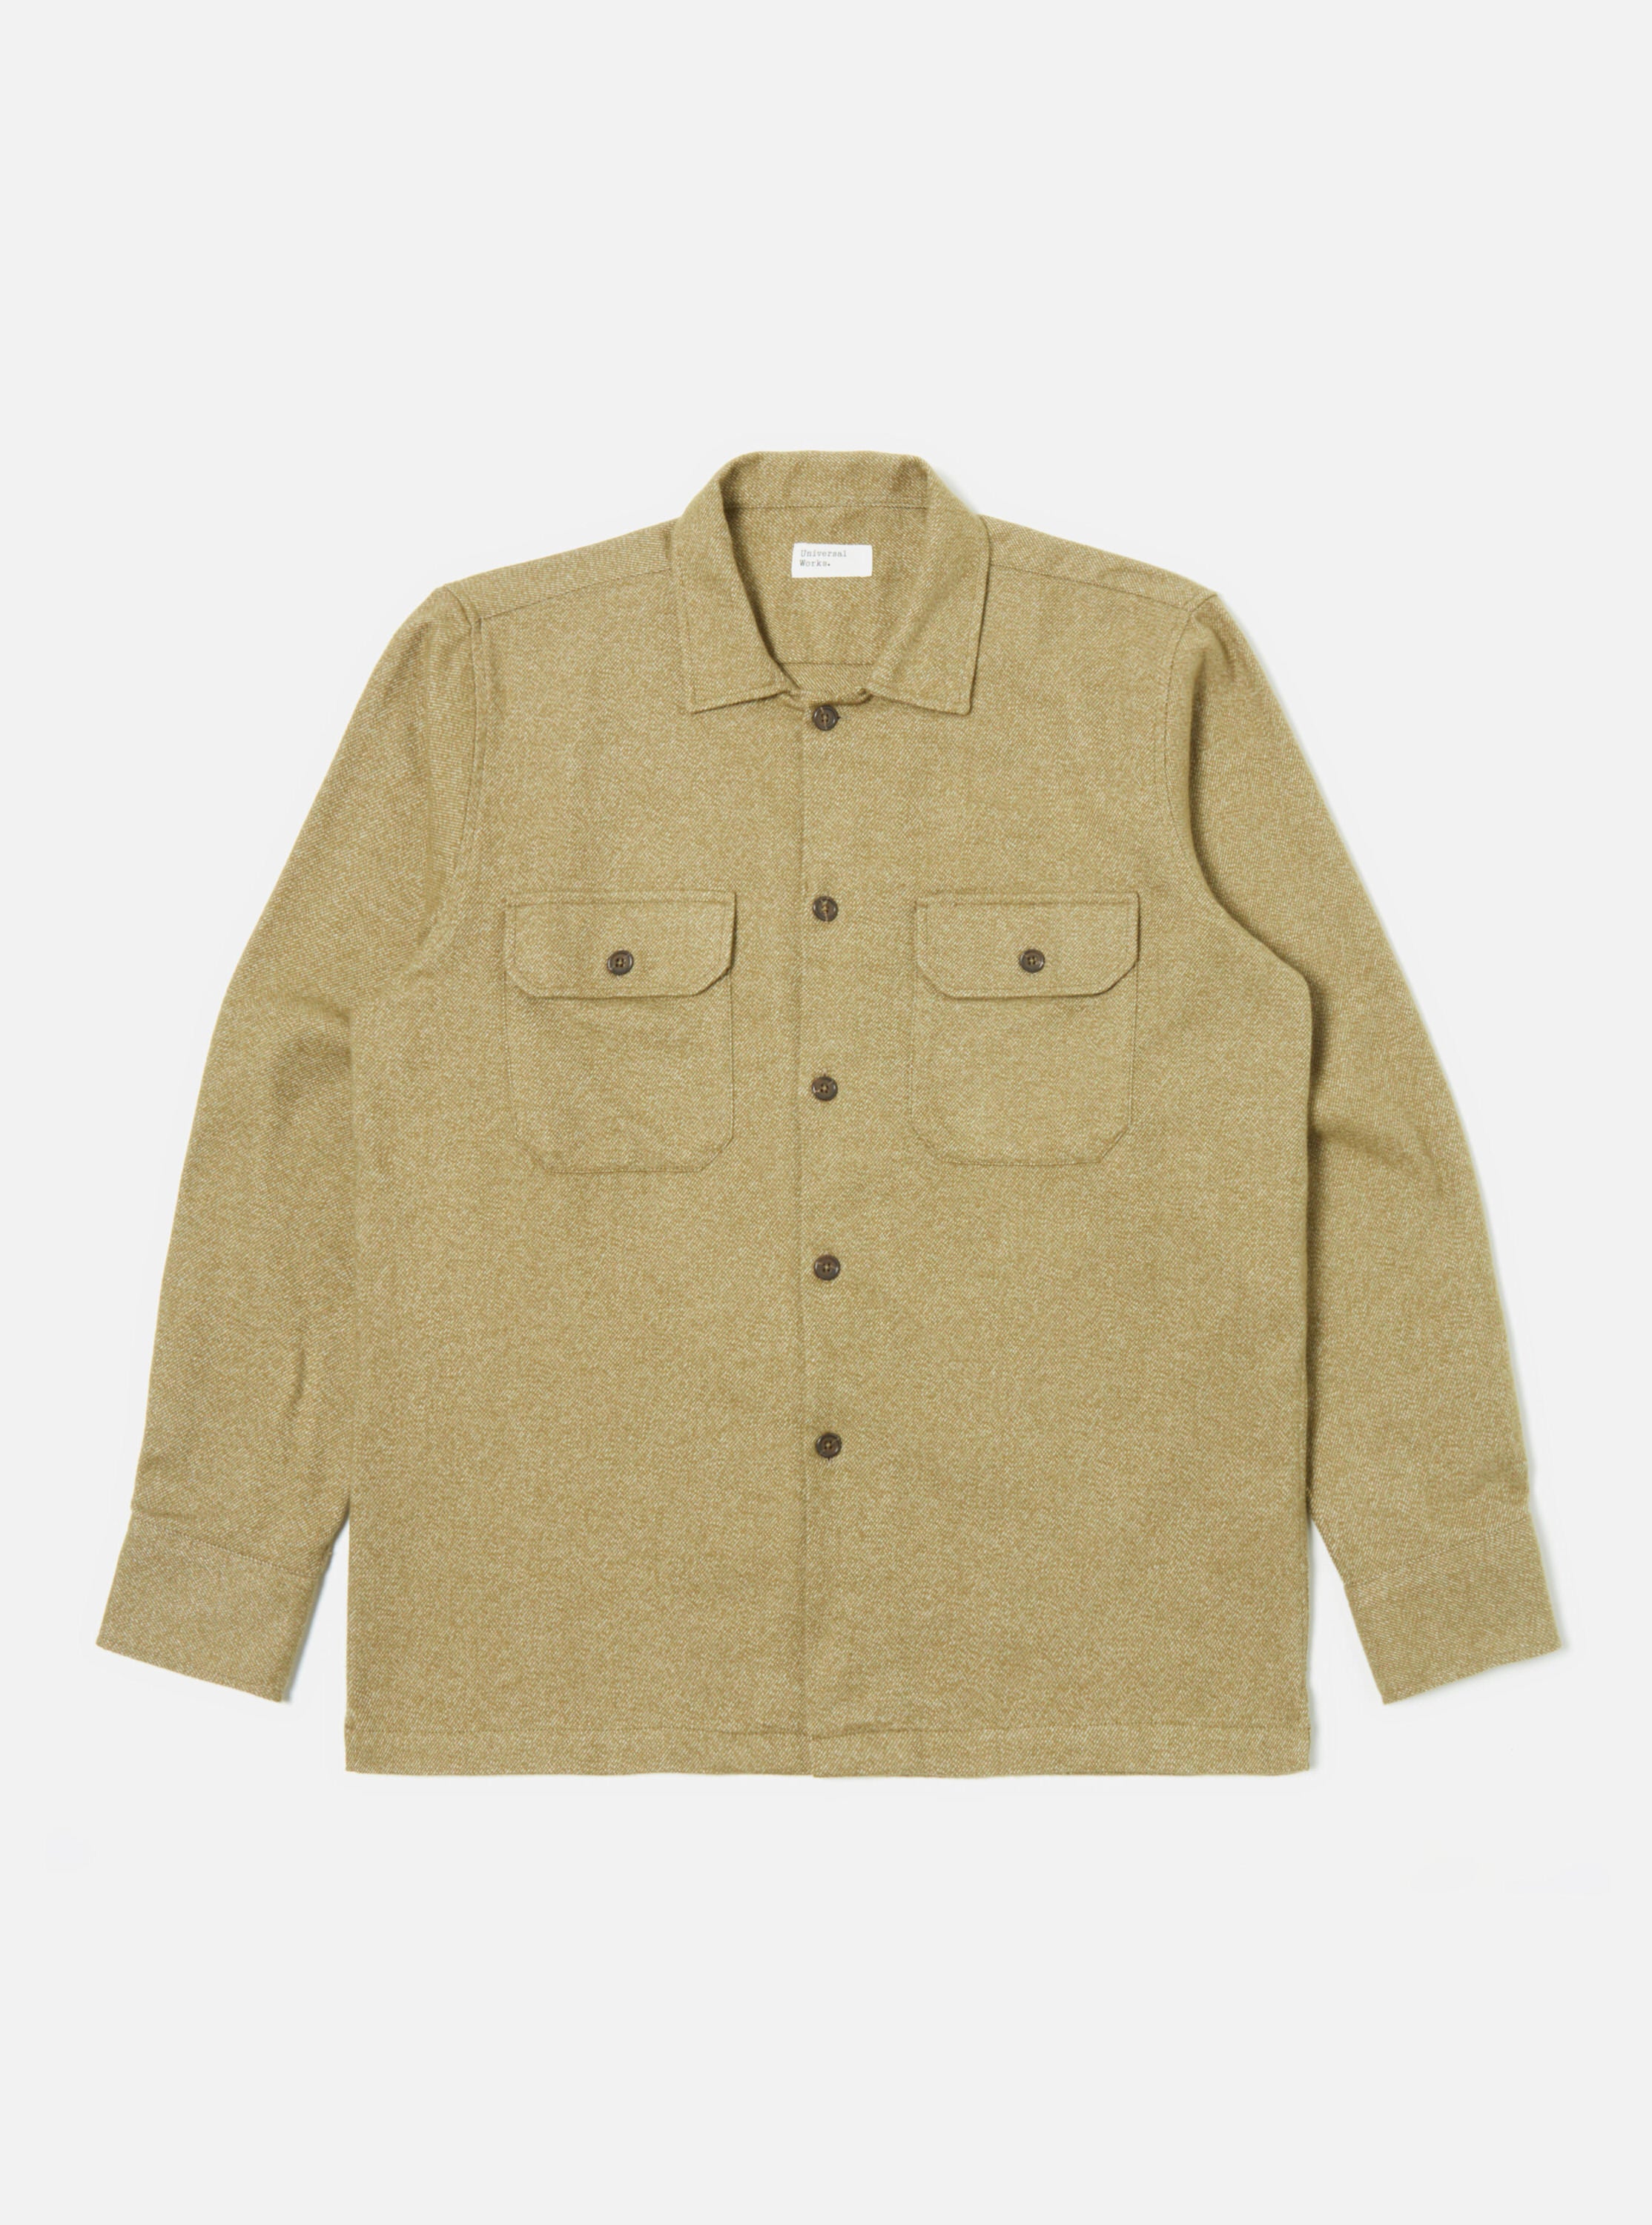 Universal Works L/S Utility Shirt in Olive Soft Flannel Cotton